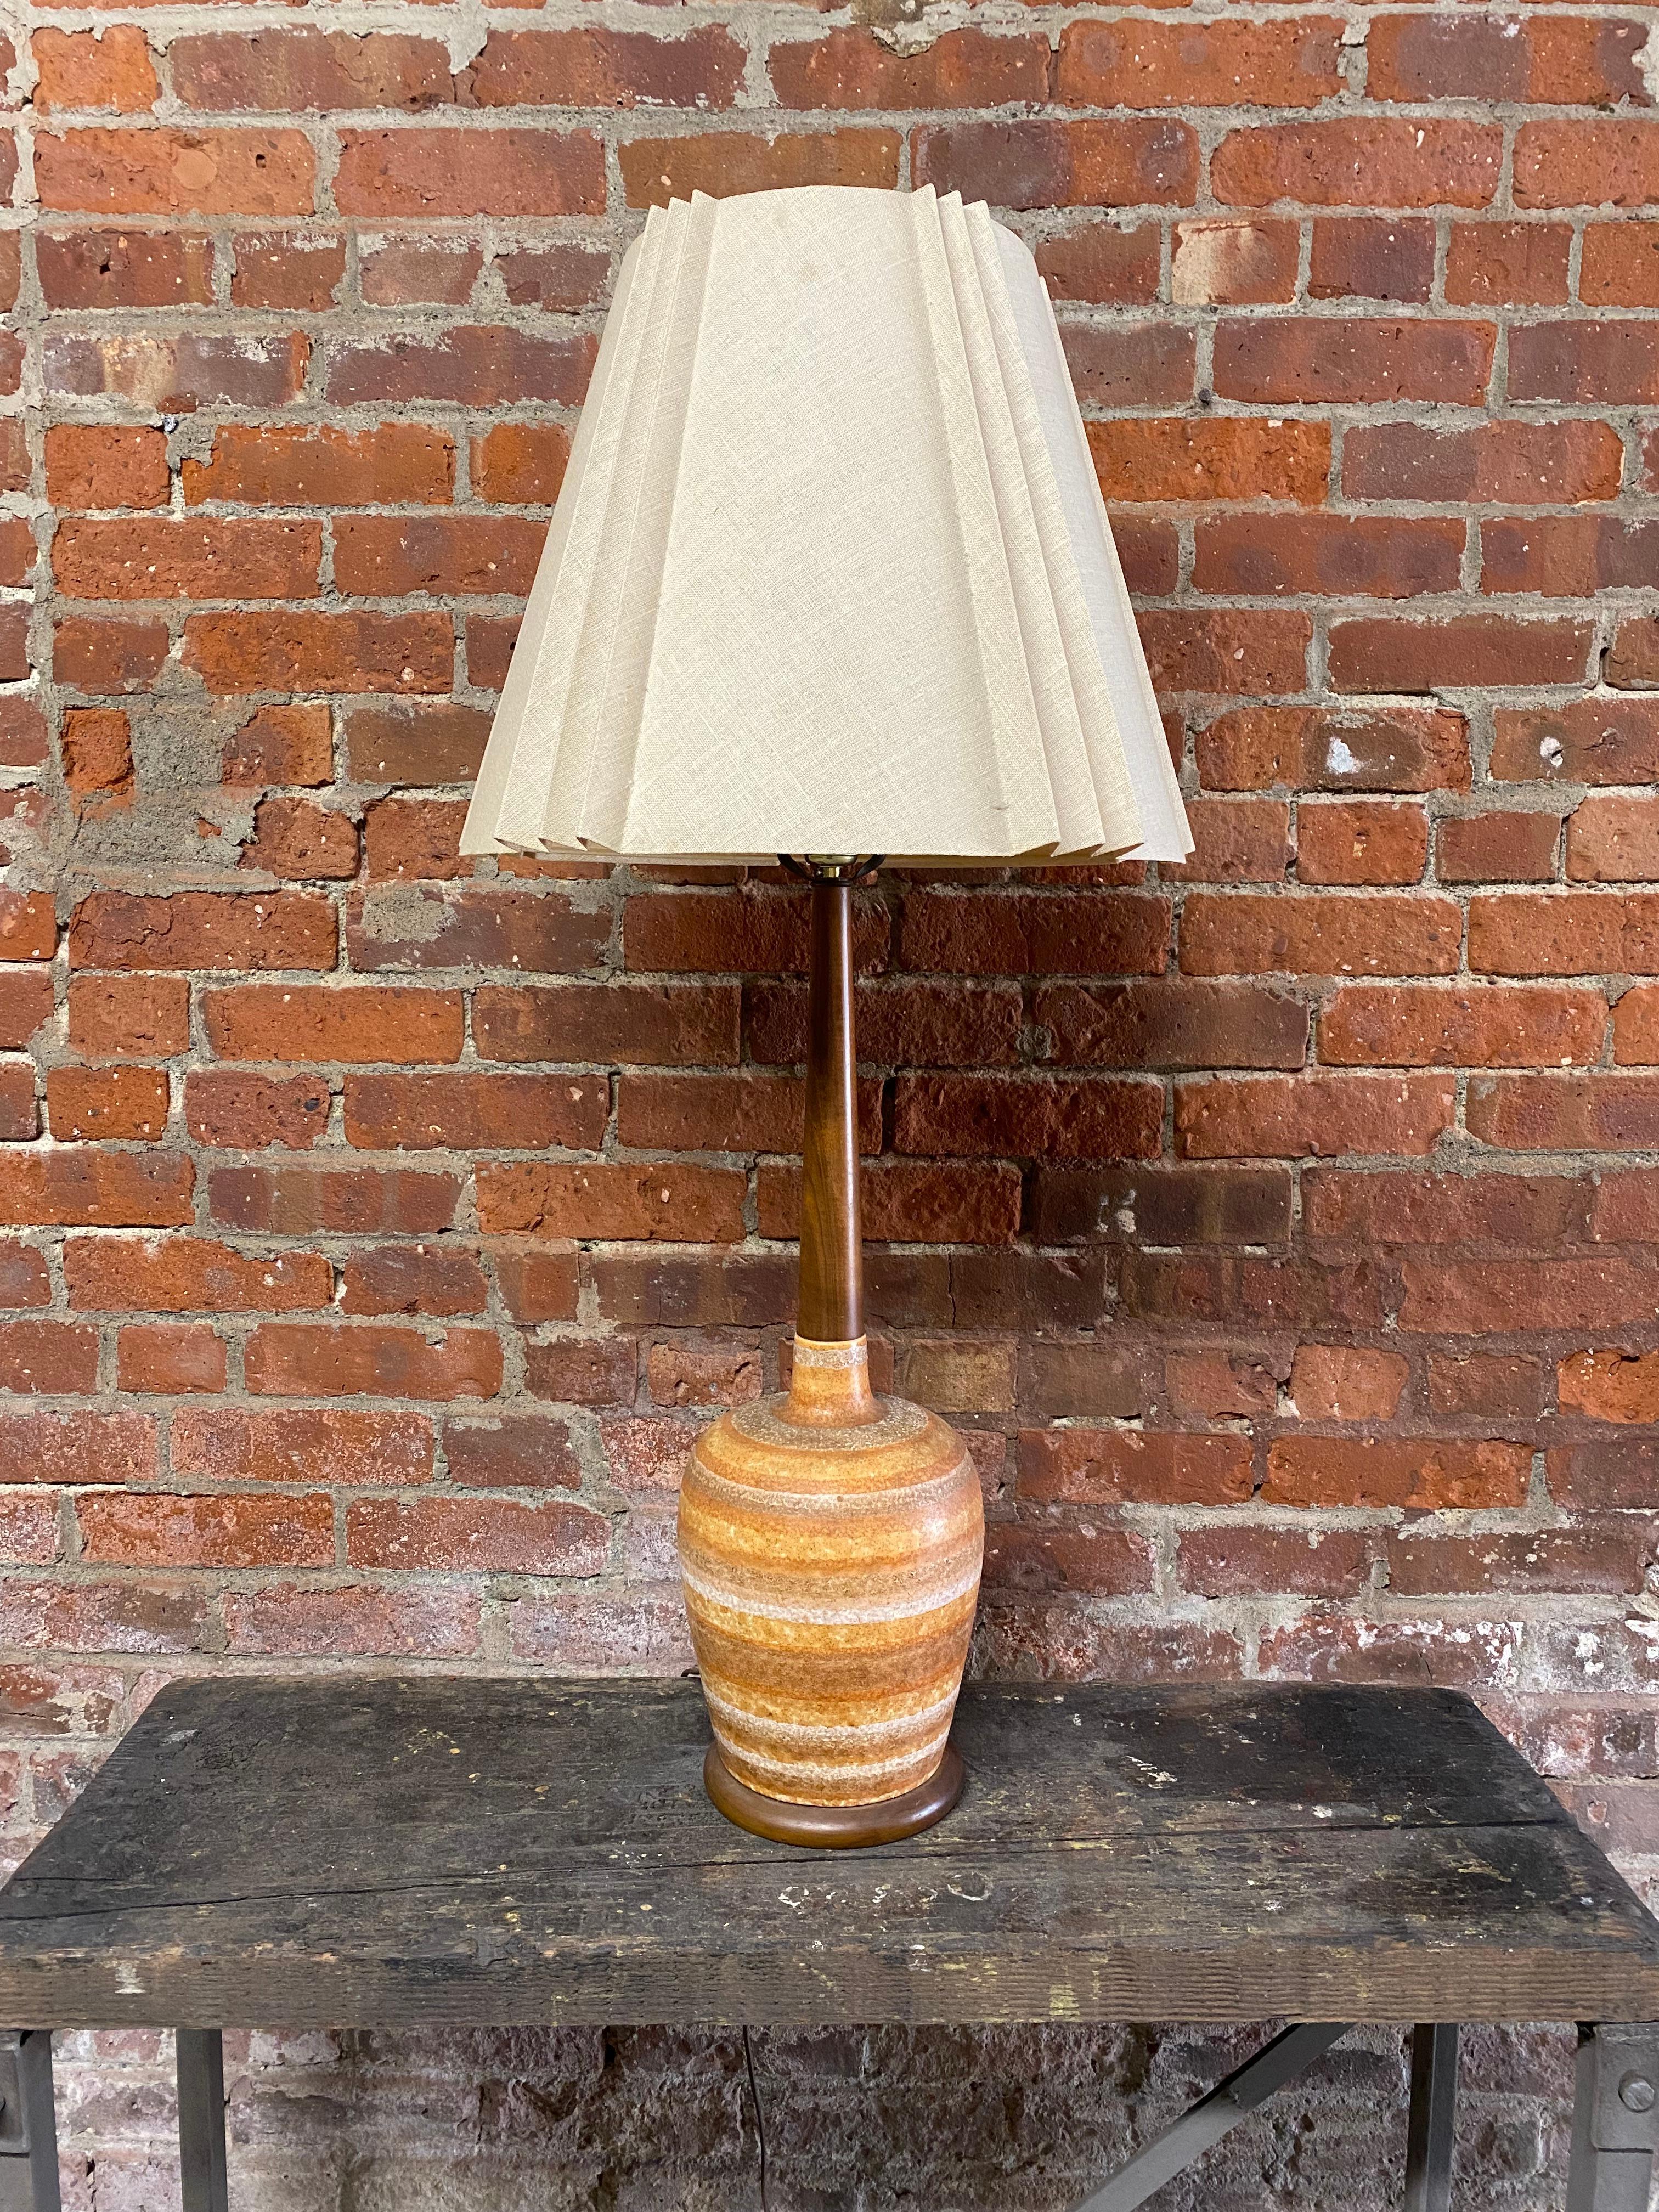 A nice combination of autumnal glazed ceramic and warm wood accent in the style of the Glidden Gulfstream line. Orange, rust, brown and off white glazes with a tapered walnut shaft and round base. Circa 1960. Good overall condition with no visible,